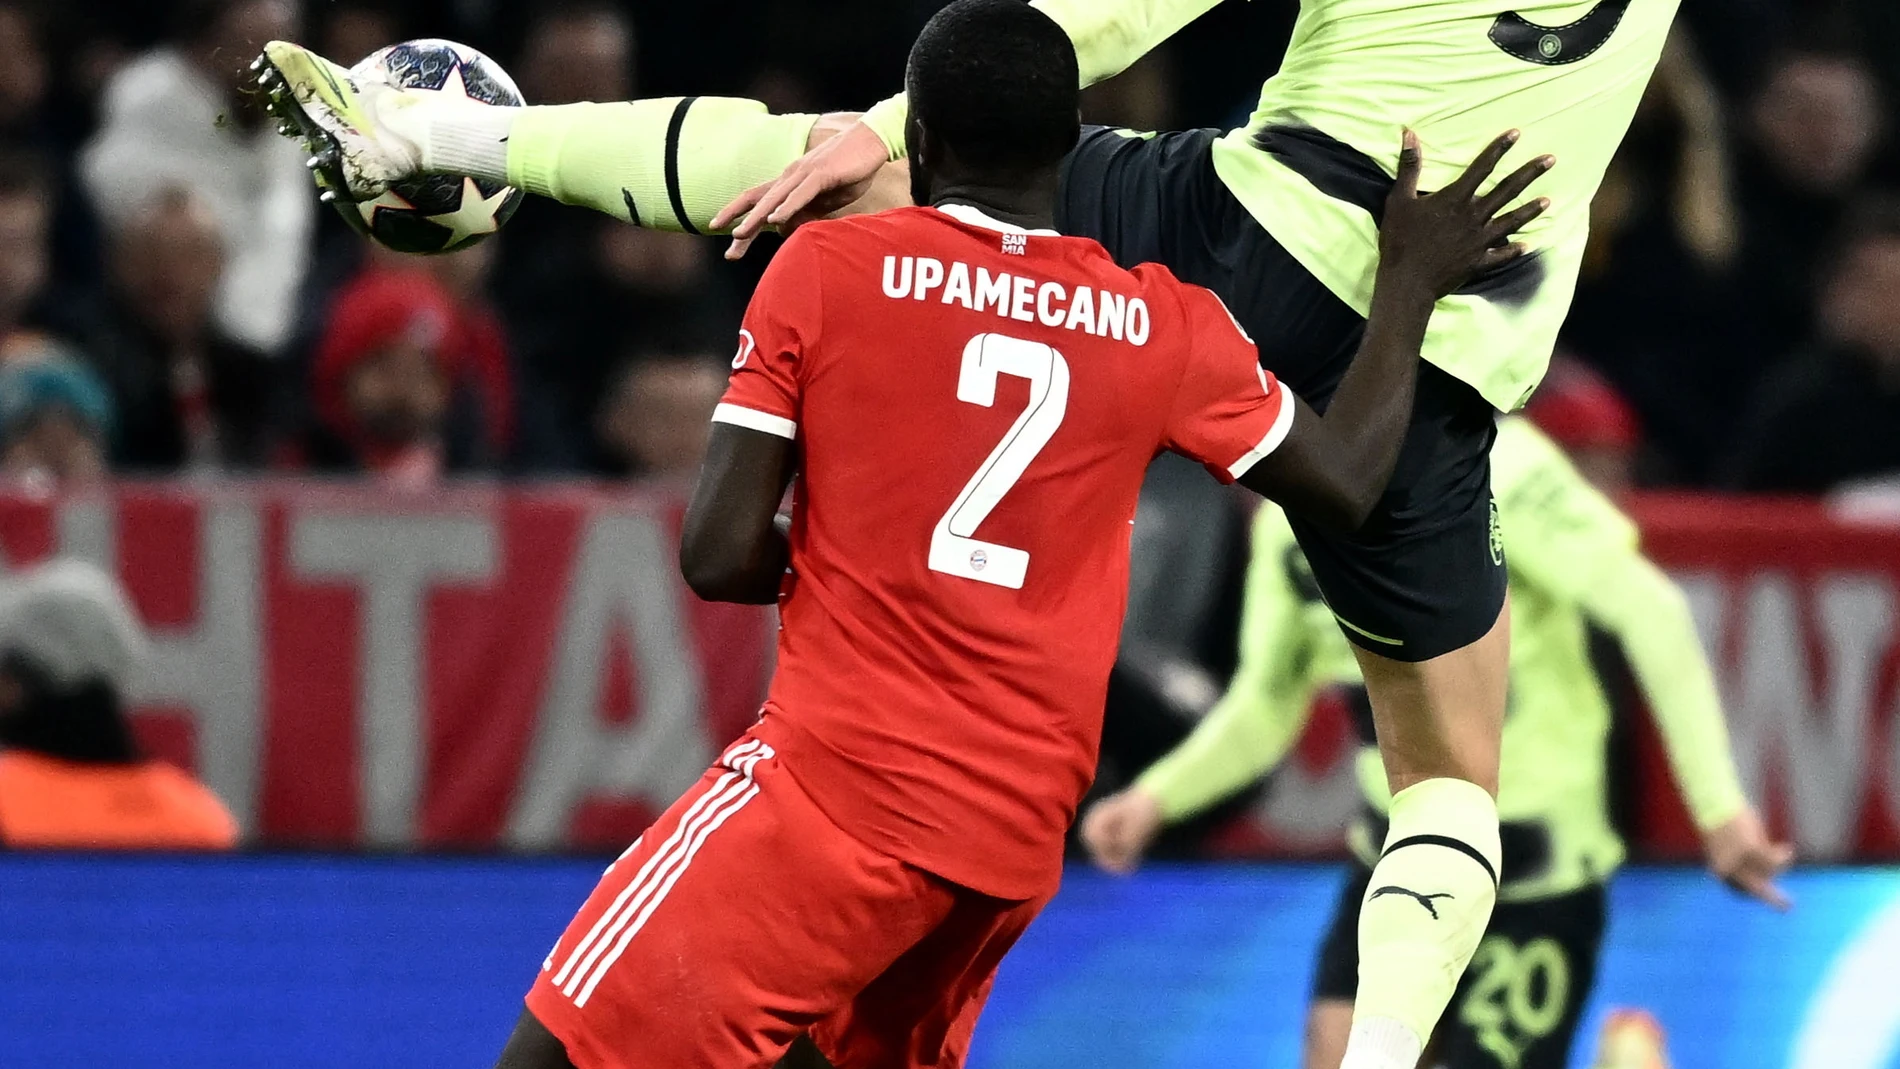 Munich (Germany), 19/04/2023.- Dayot Upamecano of Bayern Munich (L) in action against Erling Haaland of Manchester City (R) during the UEFA Champions League quarter final, 2nd leg match between Bayern Munich and Manchester City in Munich, Germany, 19 April 2023. (Liga de Campeones, Alemania) EFE/EPA/CHRISTIAN BRUNA 